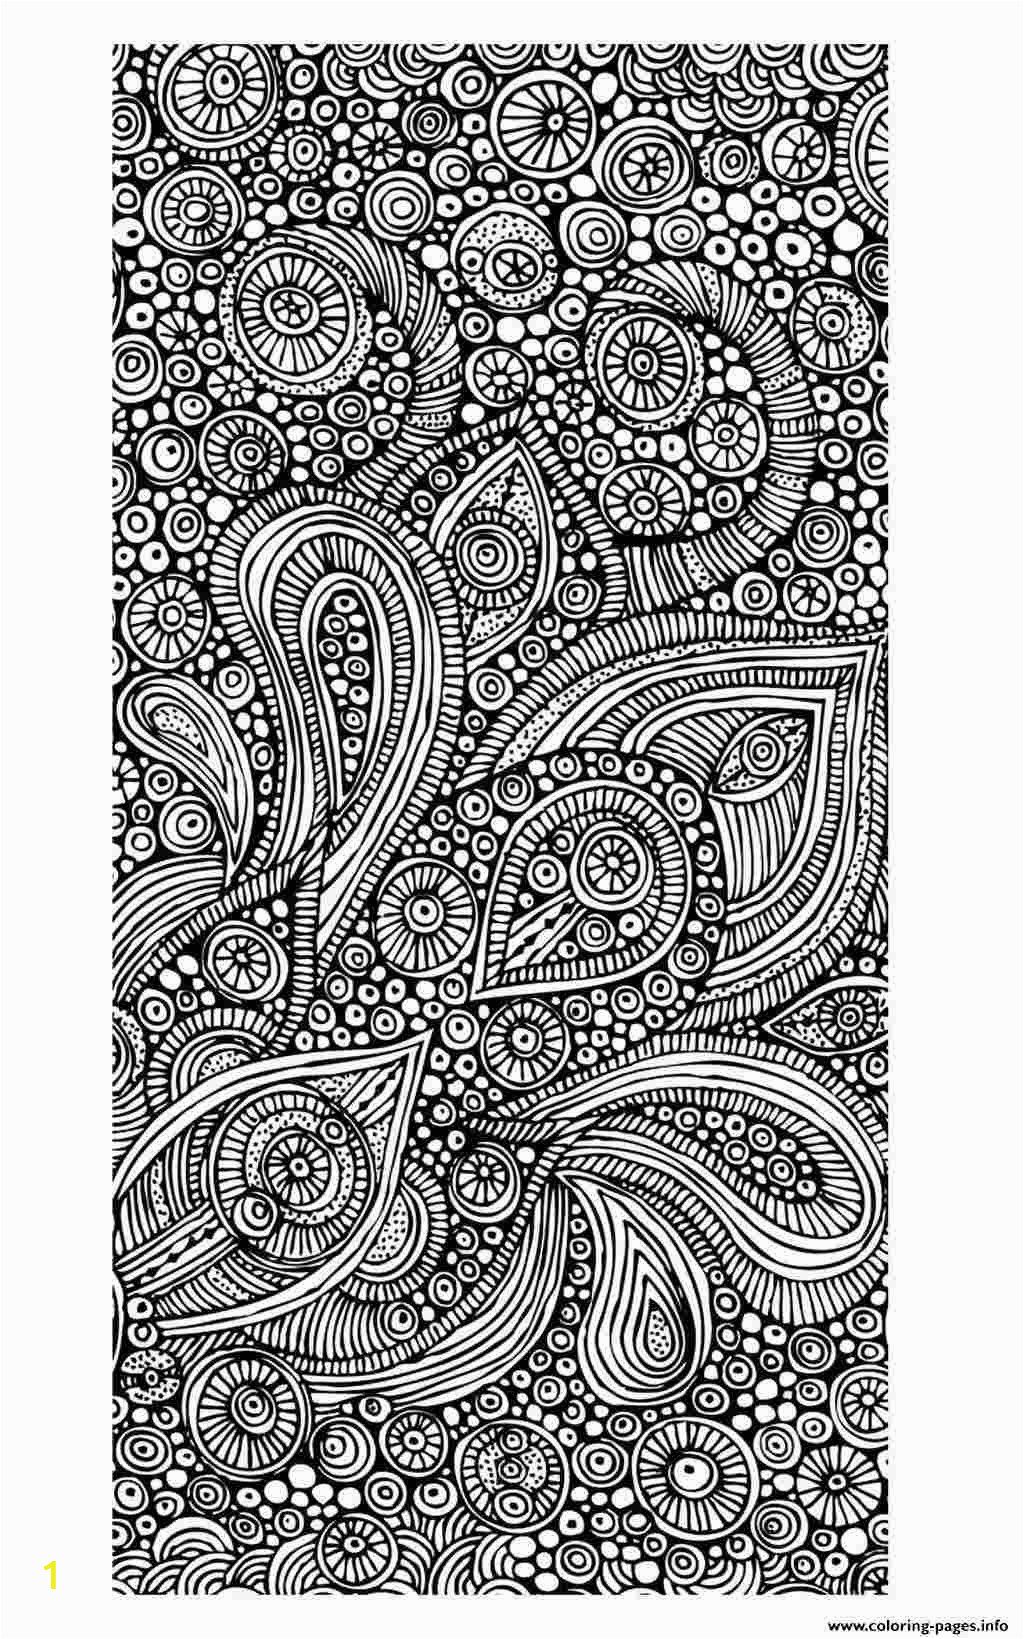 Gacha Life Free Coloring Pages Coloring Pages for Zen Zen Coloring Pages Pesquisa Do Google